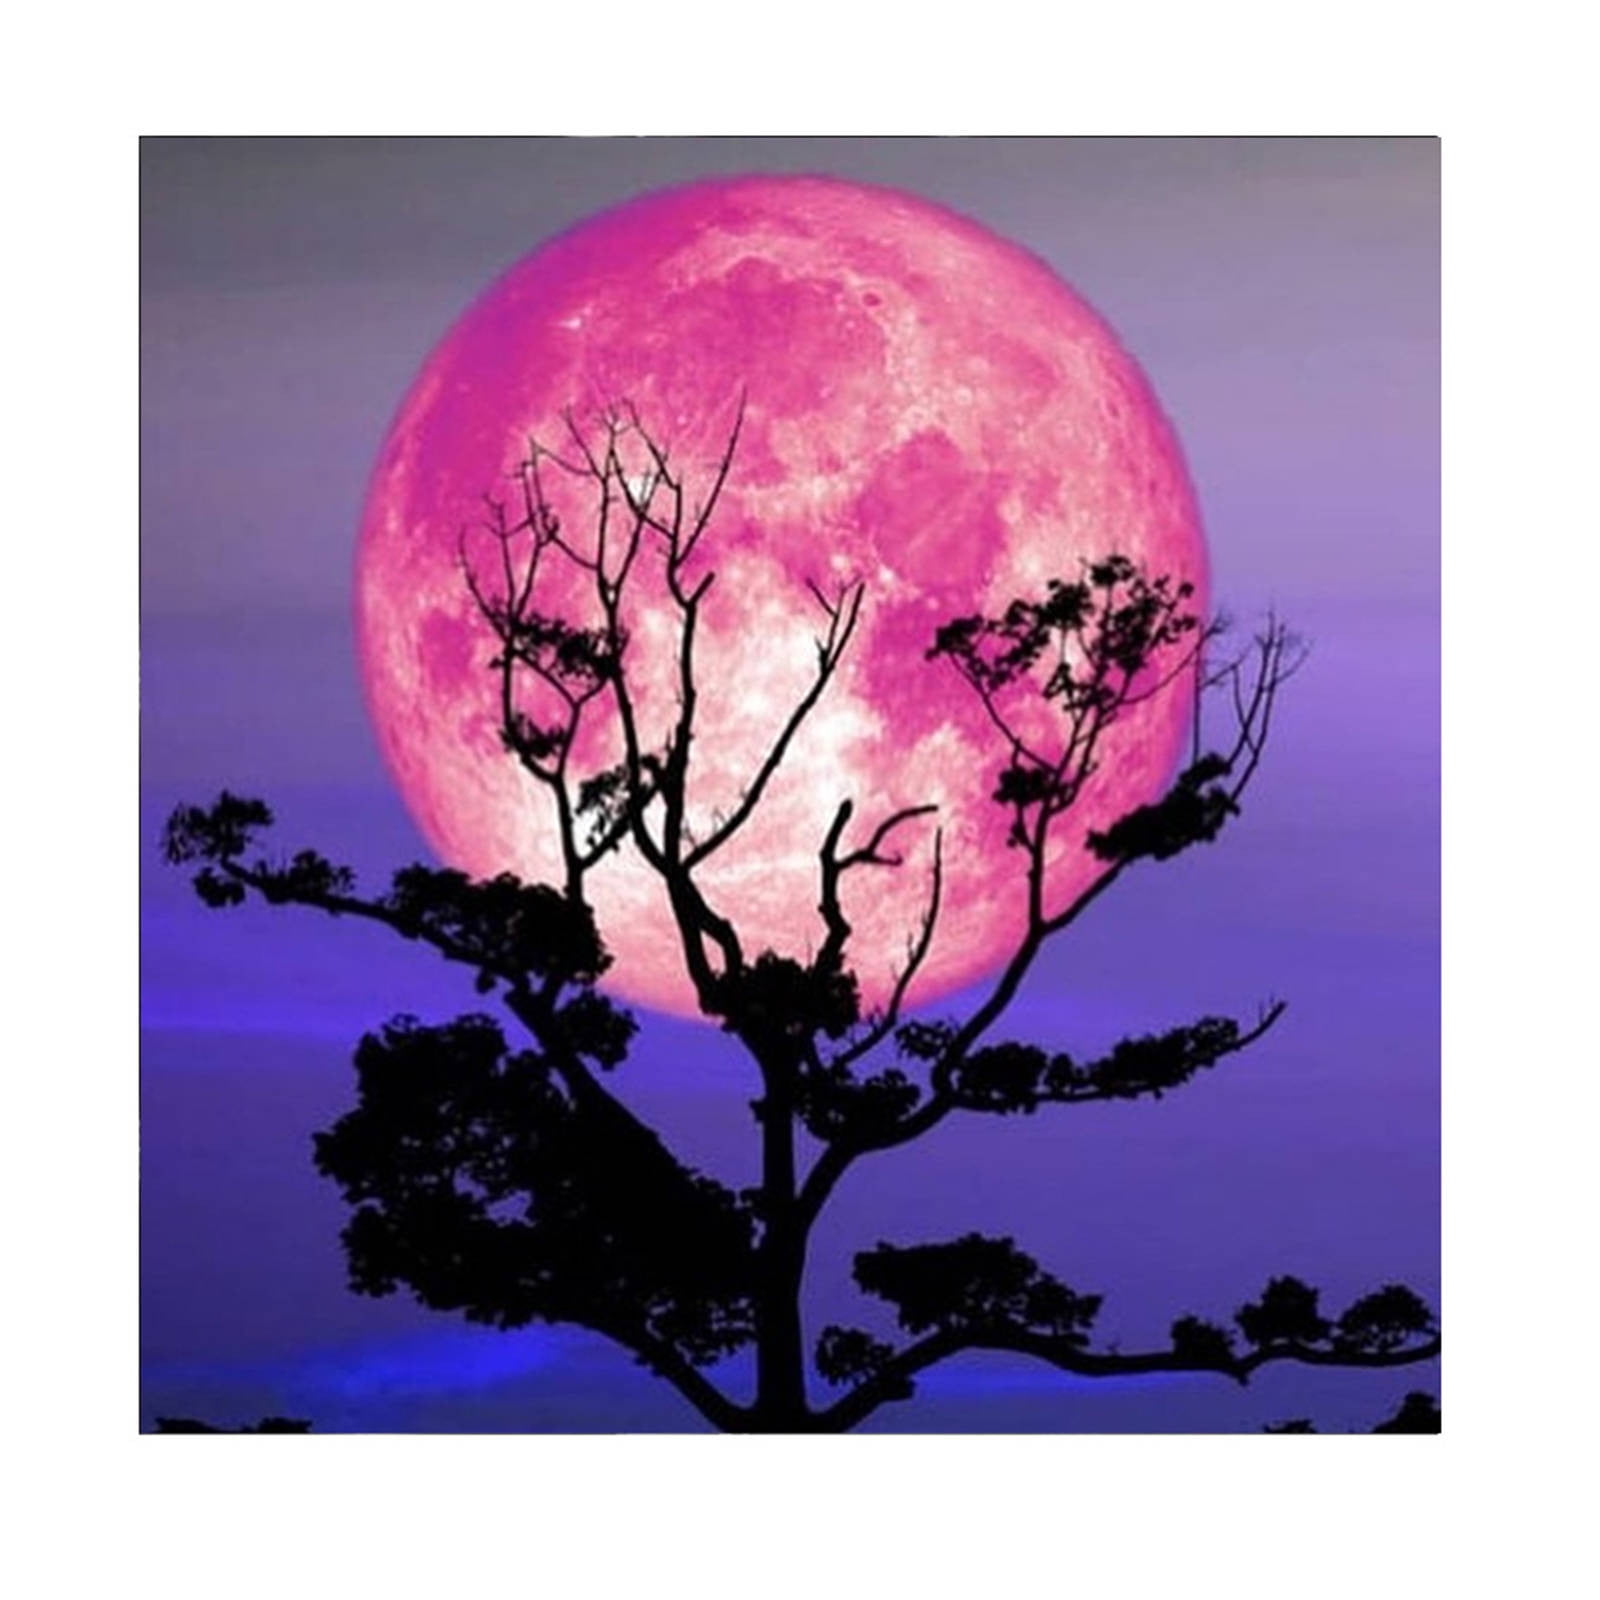 Kayannuo Bedroom Decor Christmas Clearance 5D Diamond Painting , Bright  Moon Full Drill Embroidery Picture Supplies Arts Living Room Decor 